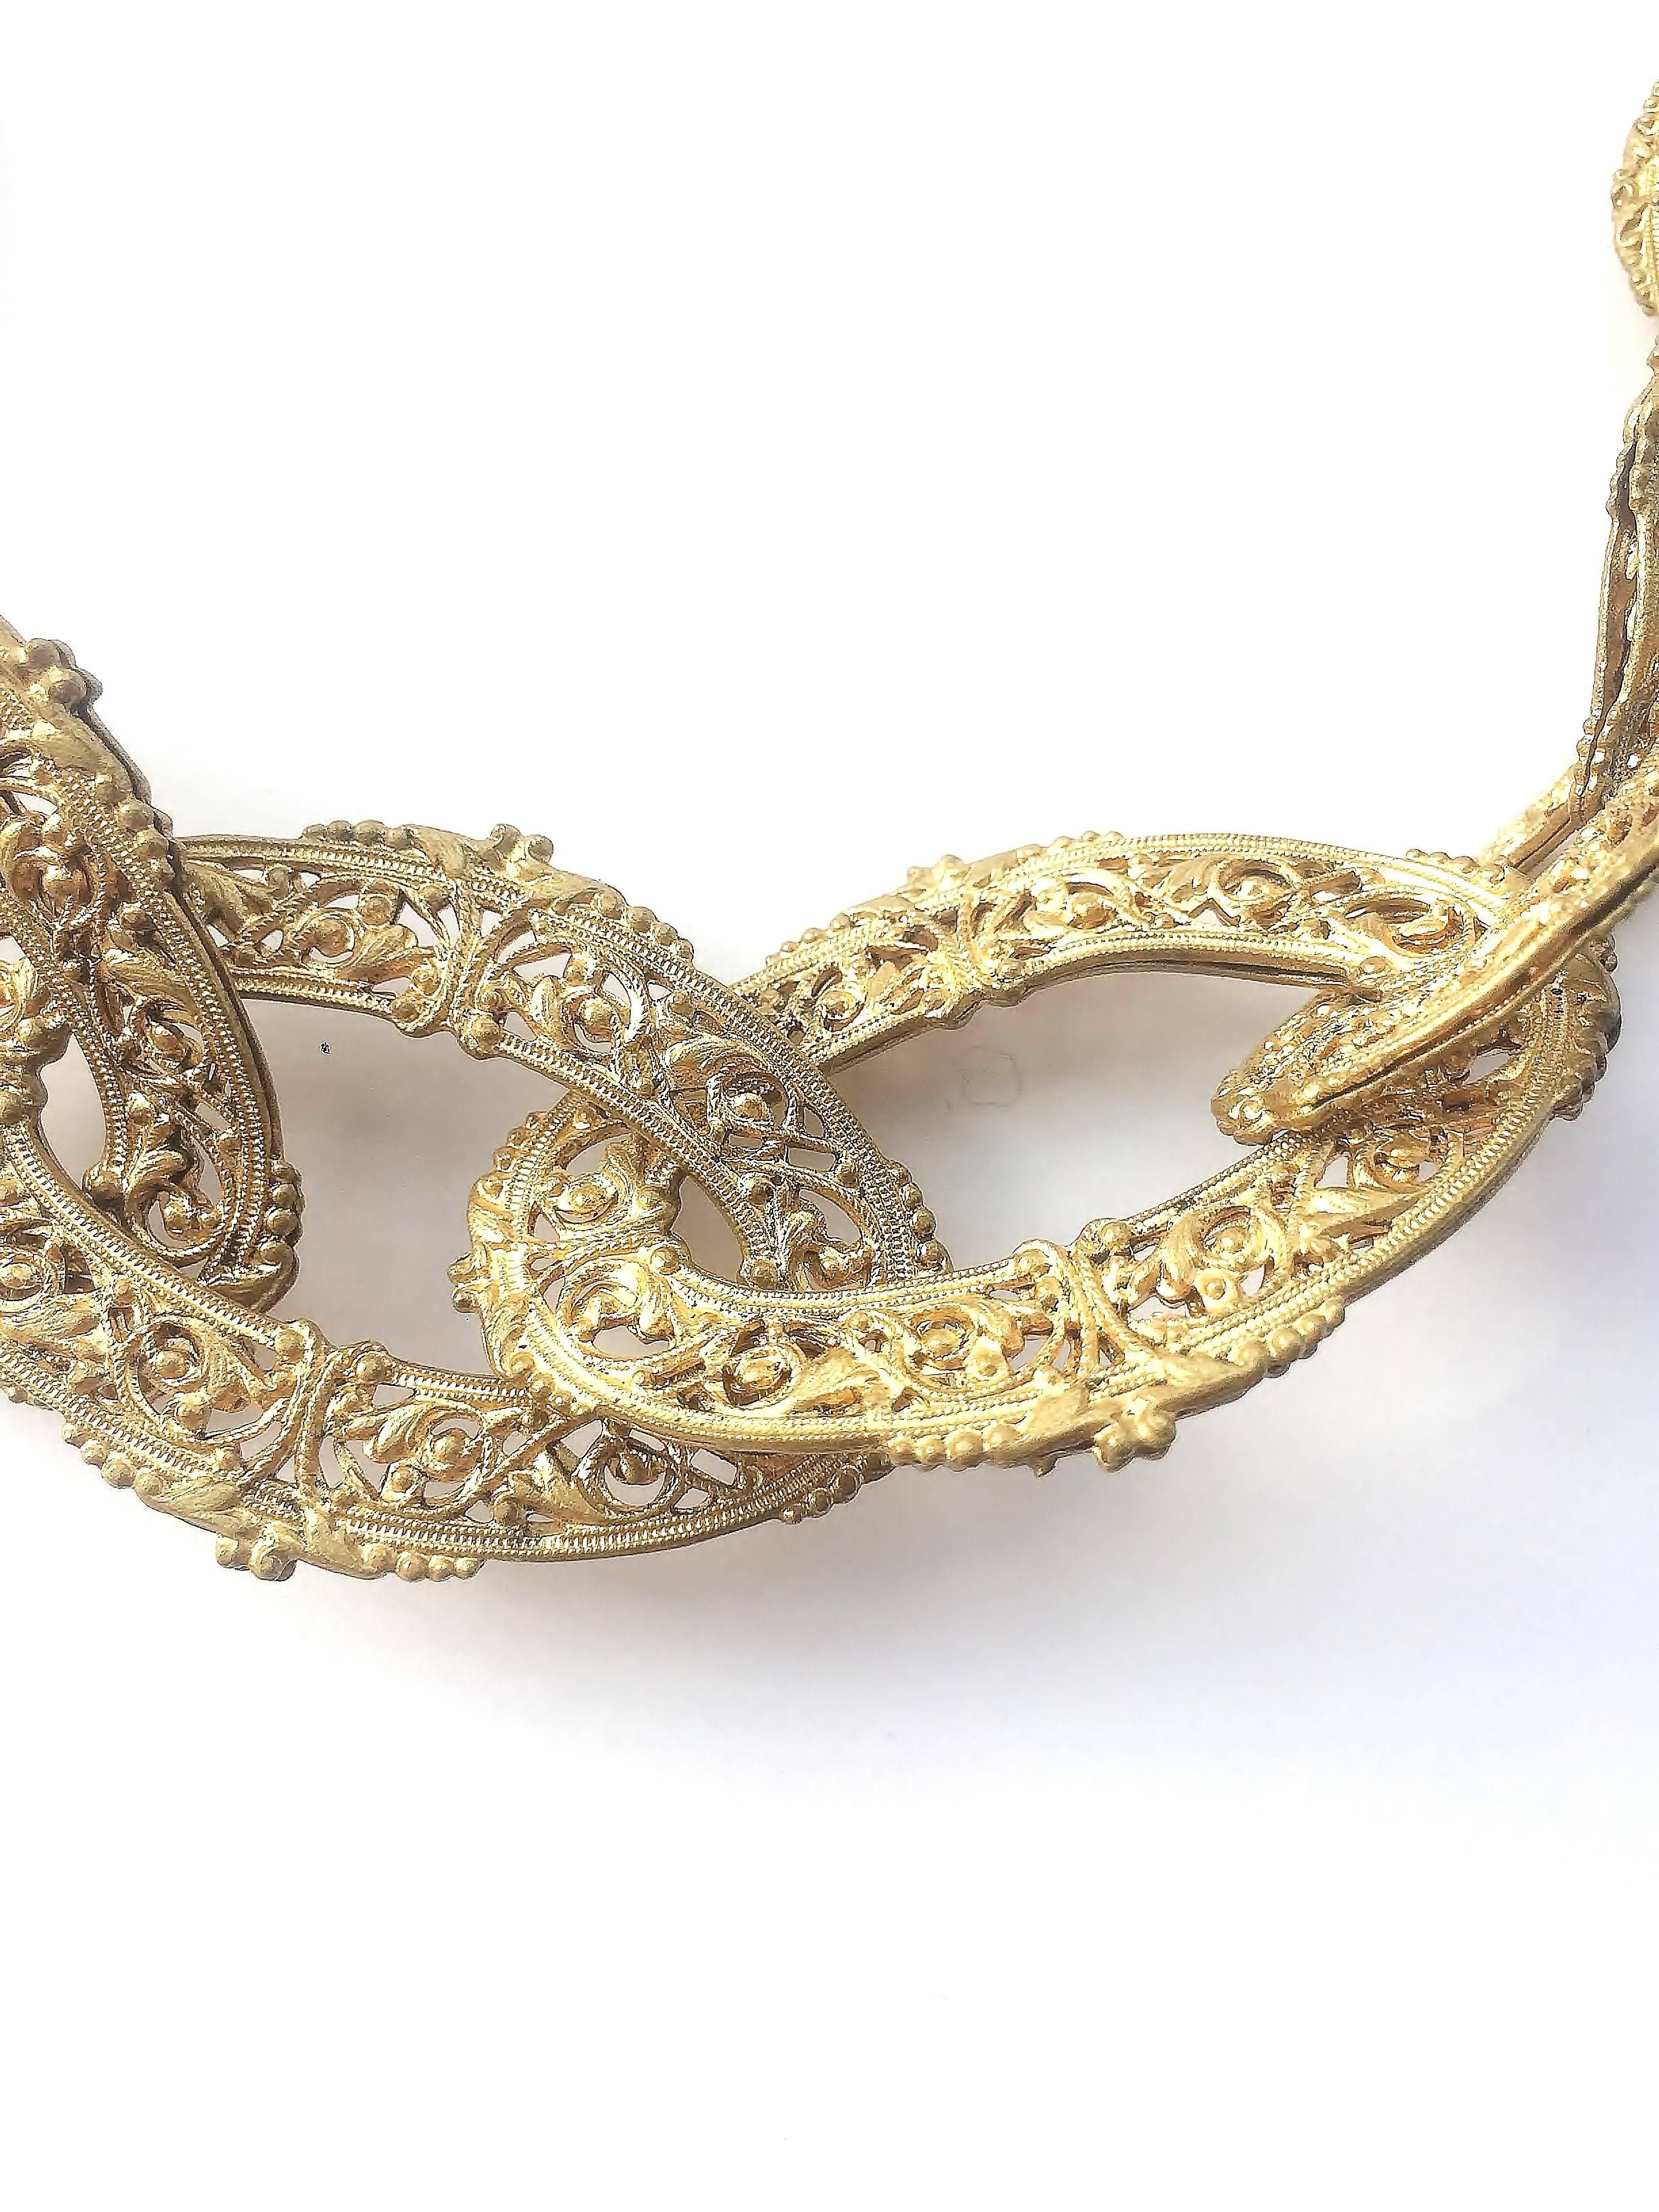 A large antiqued gold filigree link chain necklace, Goossens for Chanel, 1960s. For Sale 3